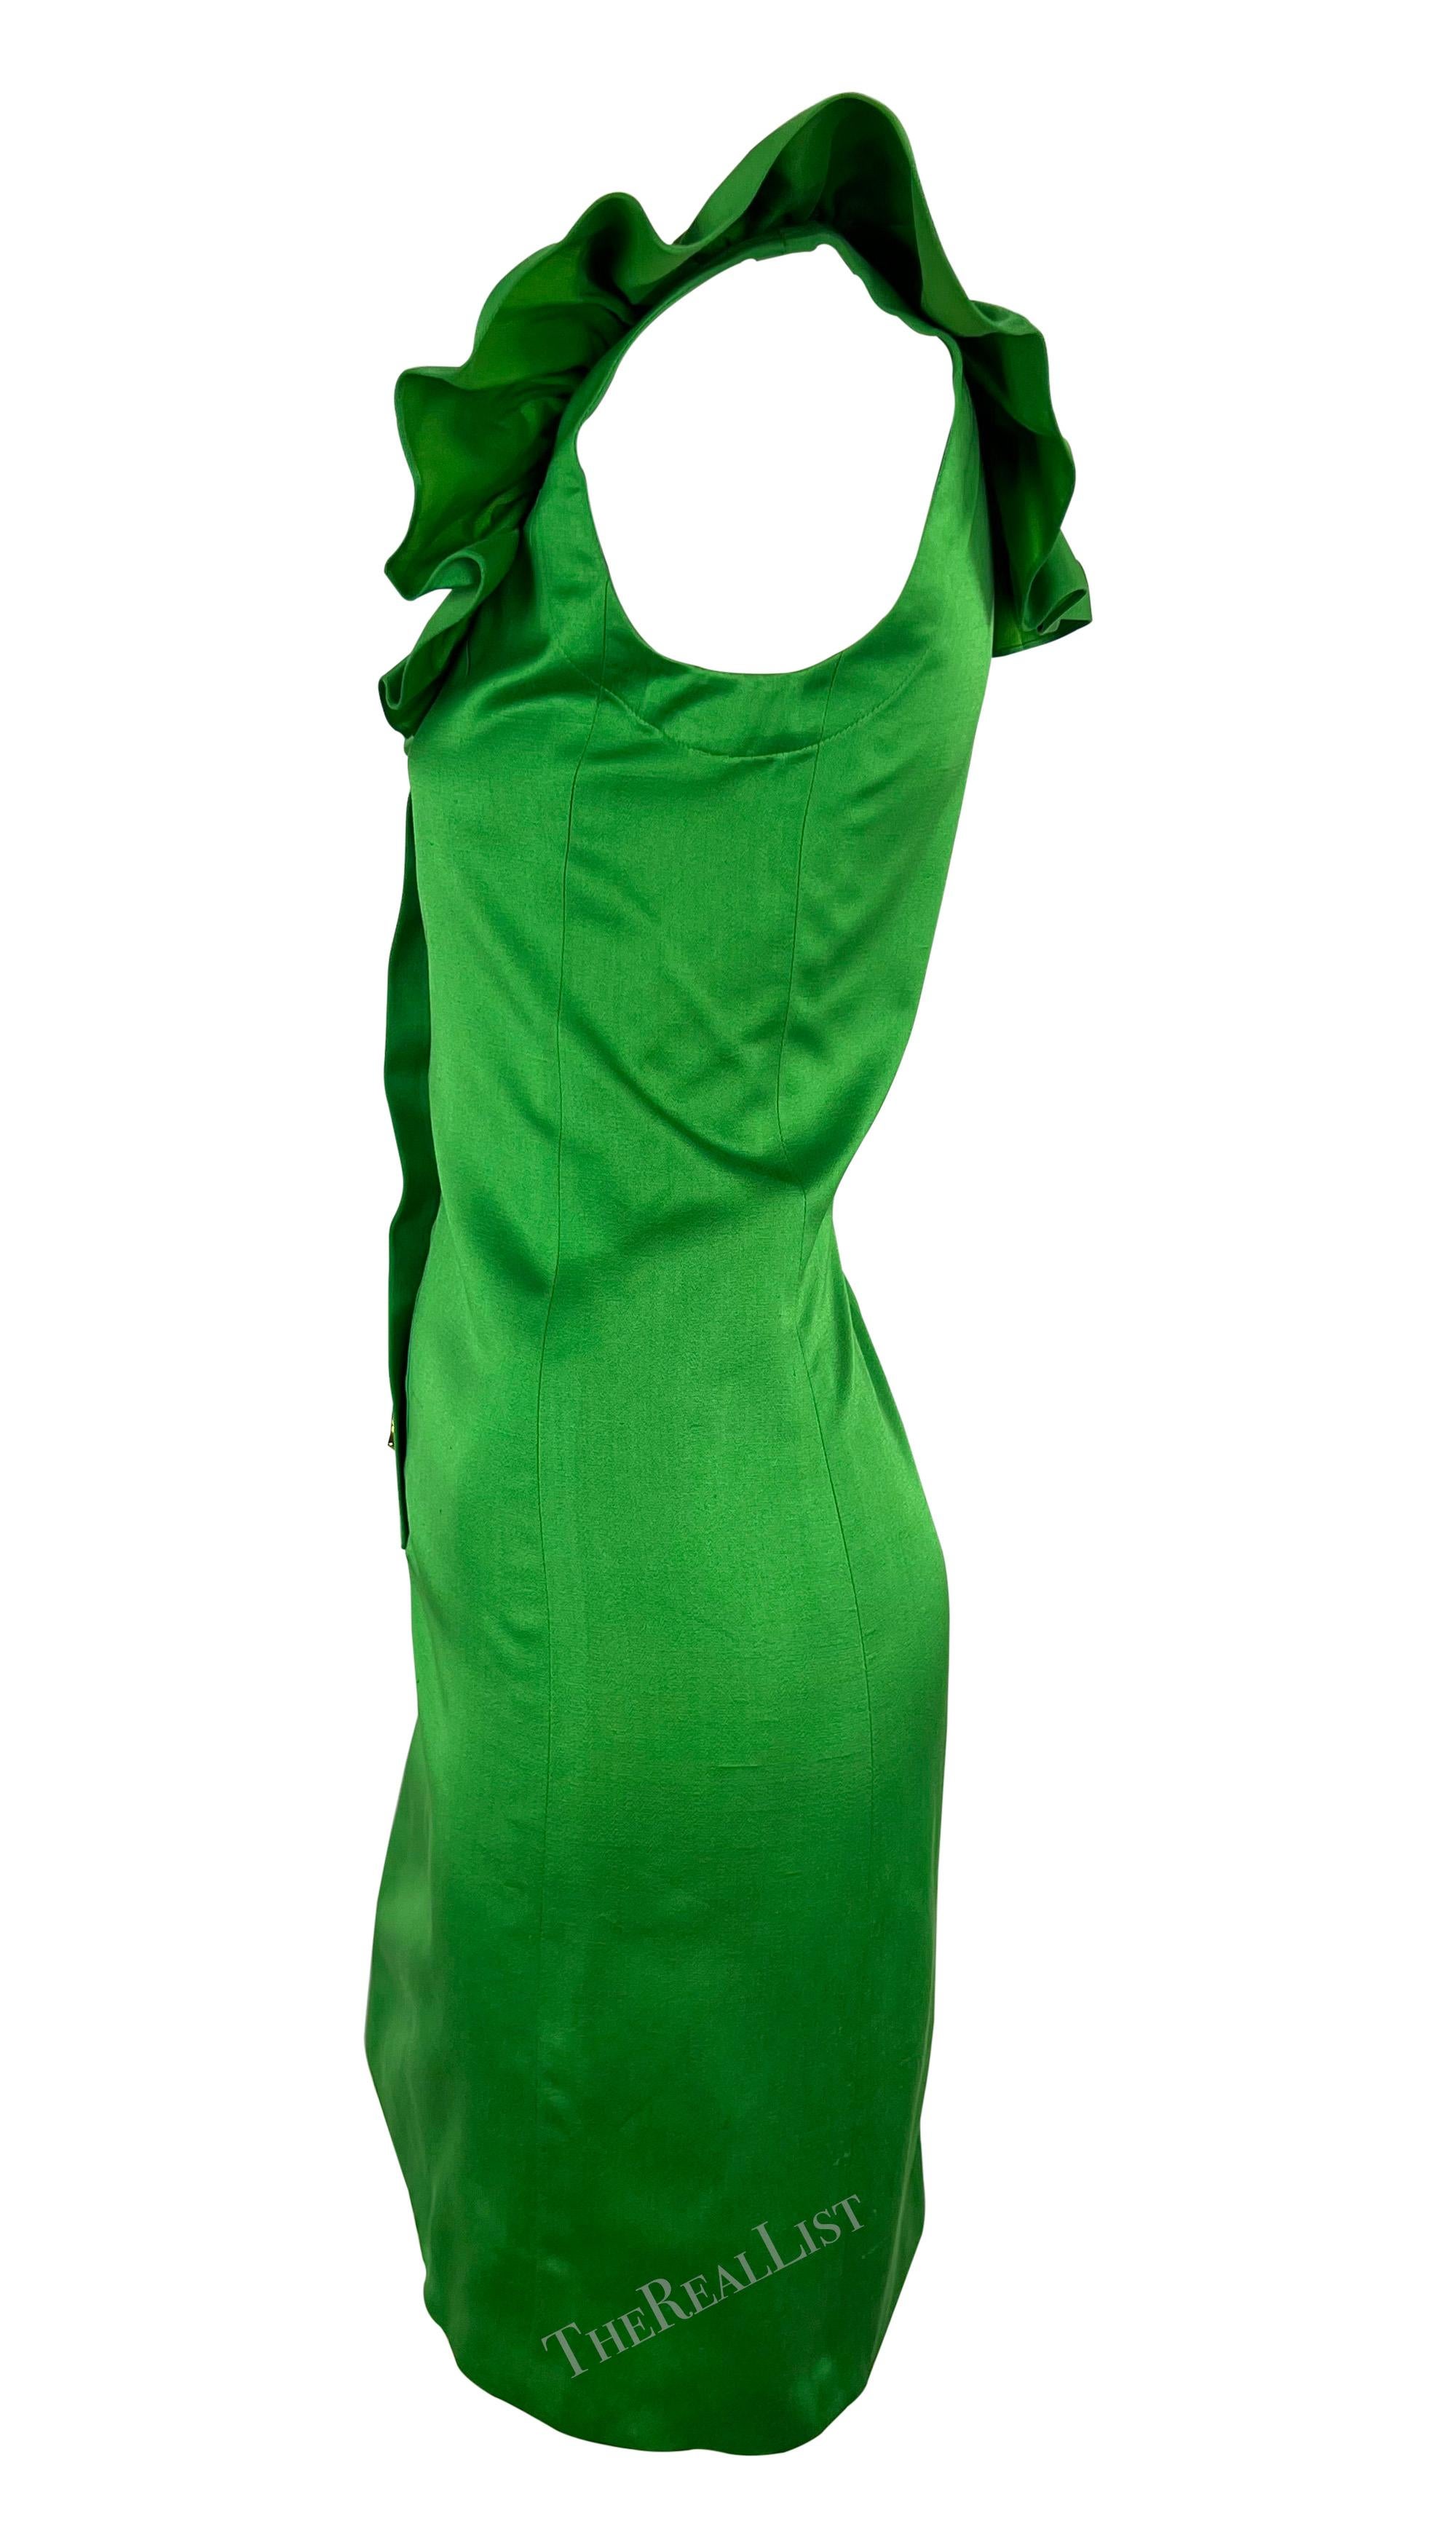 S/S 1992 Yves Saint Laurent Runway Ad Bright Green Ruffle Heart Button Dress For Sale 3